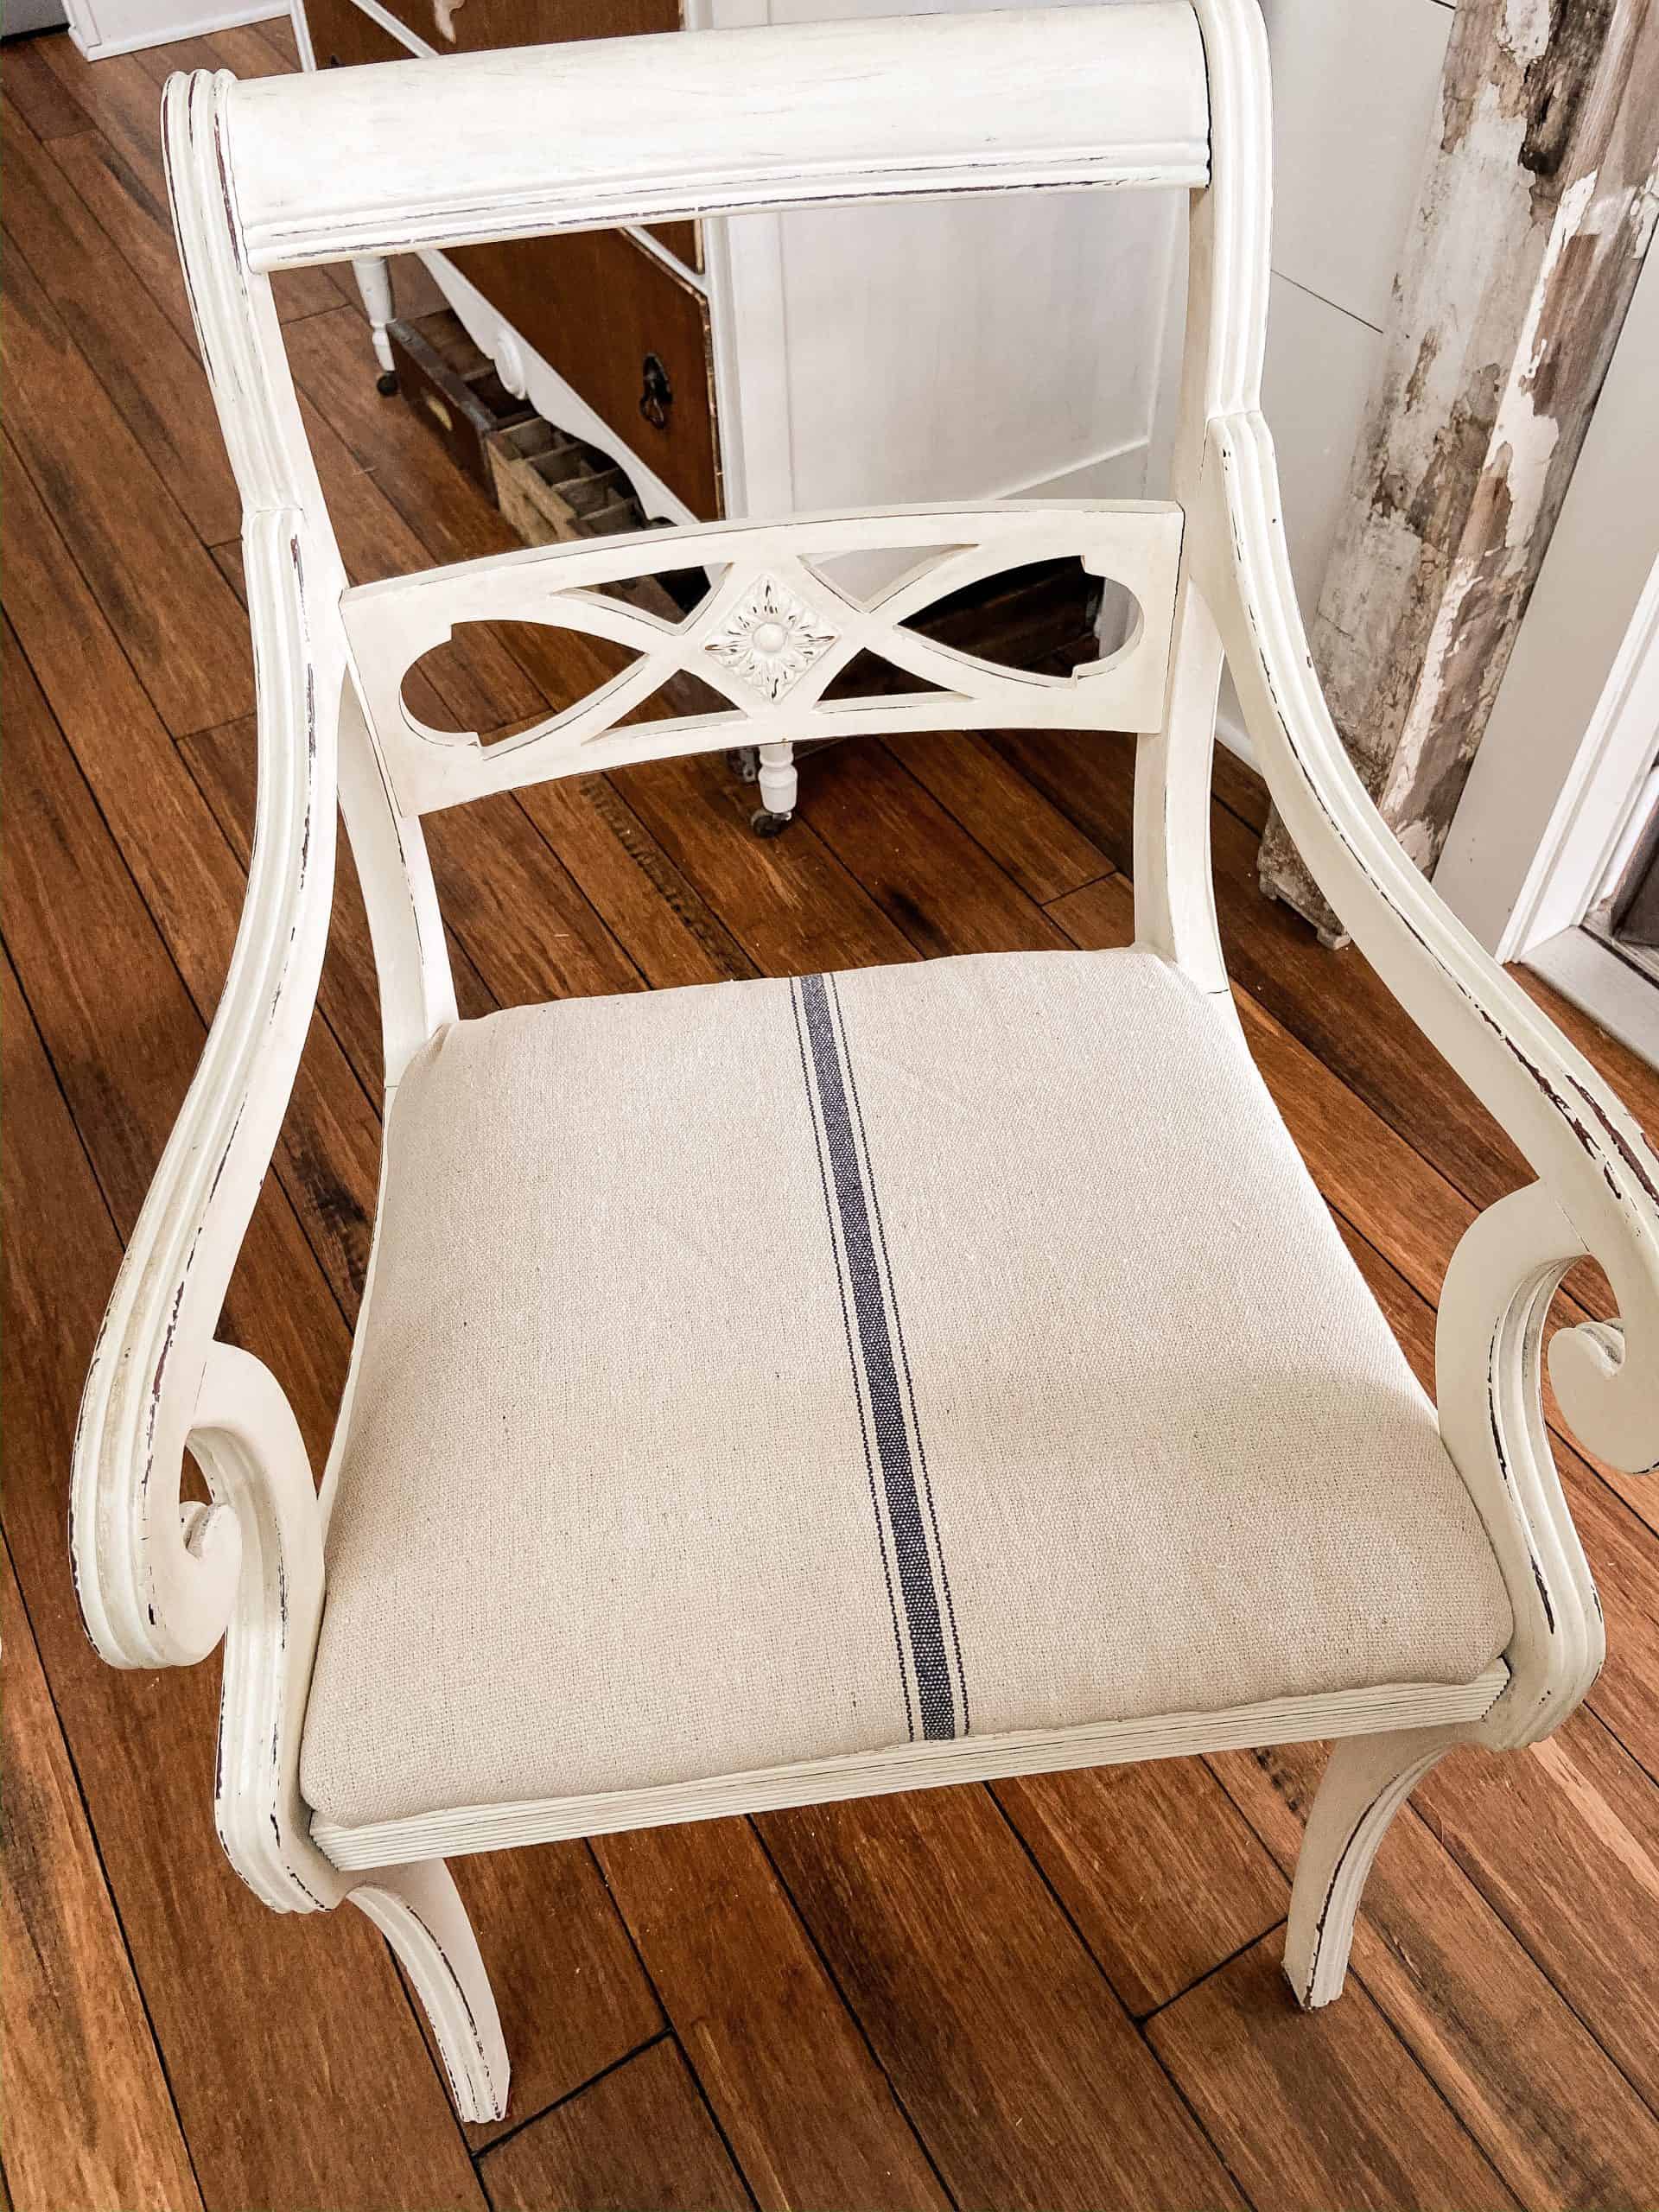 https://www.thepondsfarmhouse.com/wp-content/uploads/2020/10/reupholster-chair-recovered-scaled.jpg